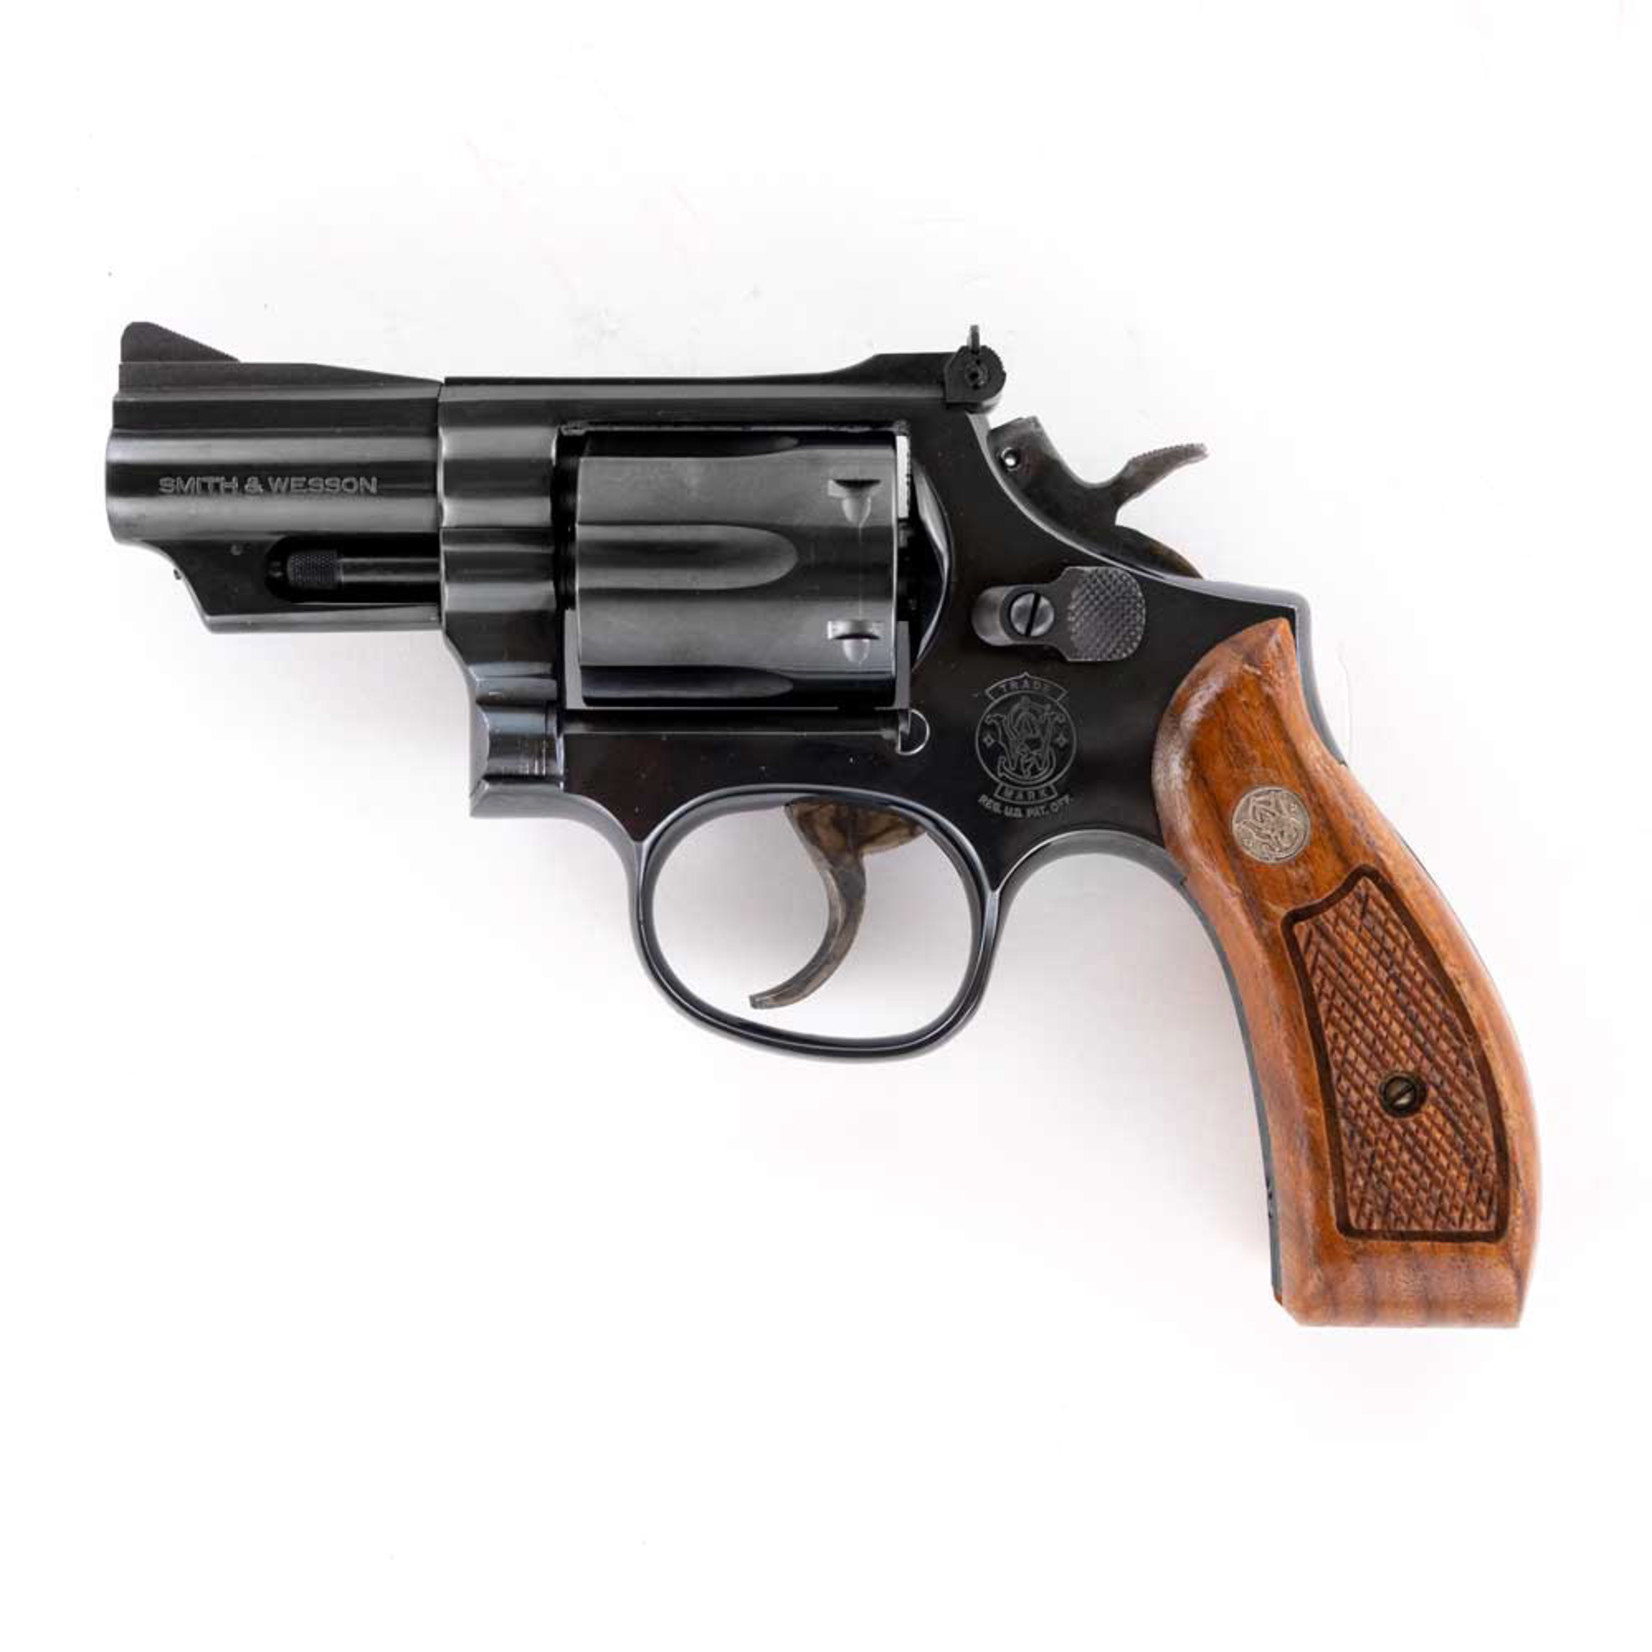 Smith and Wesson Smith & Wesson Model 19-5, 357 Magnum, Blue